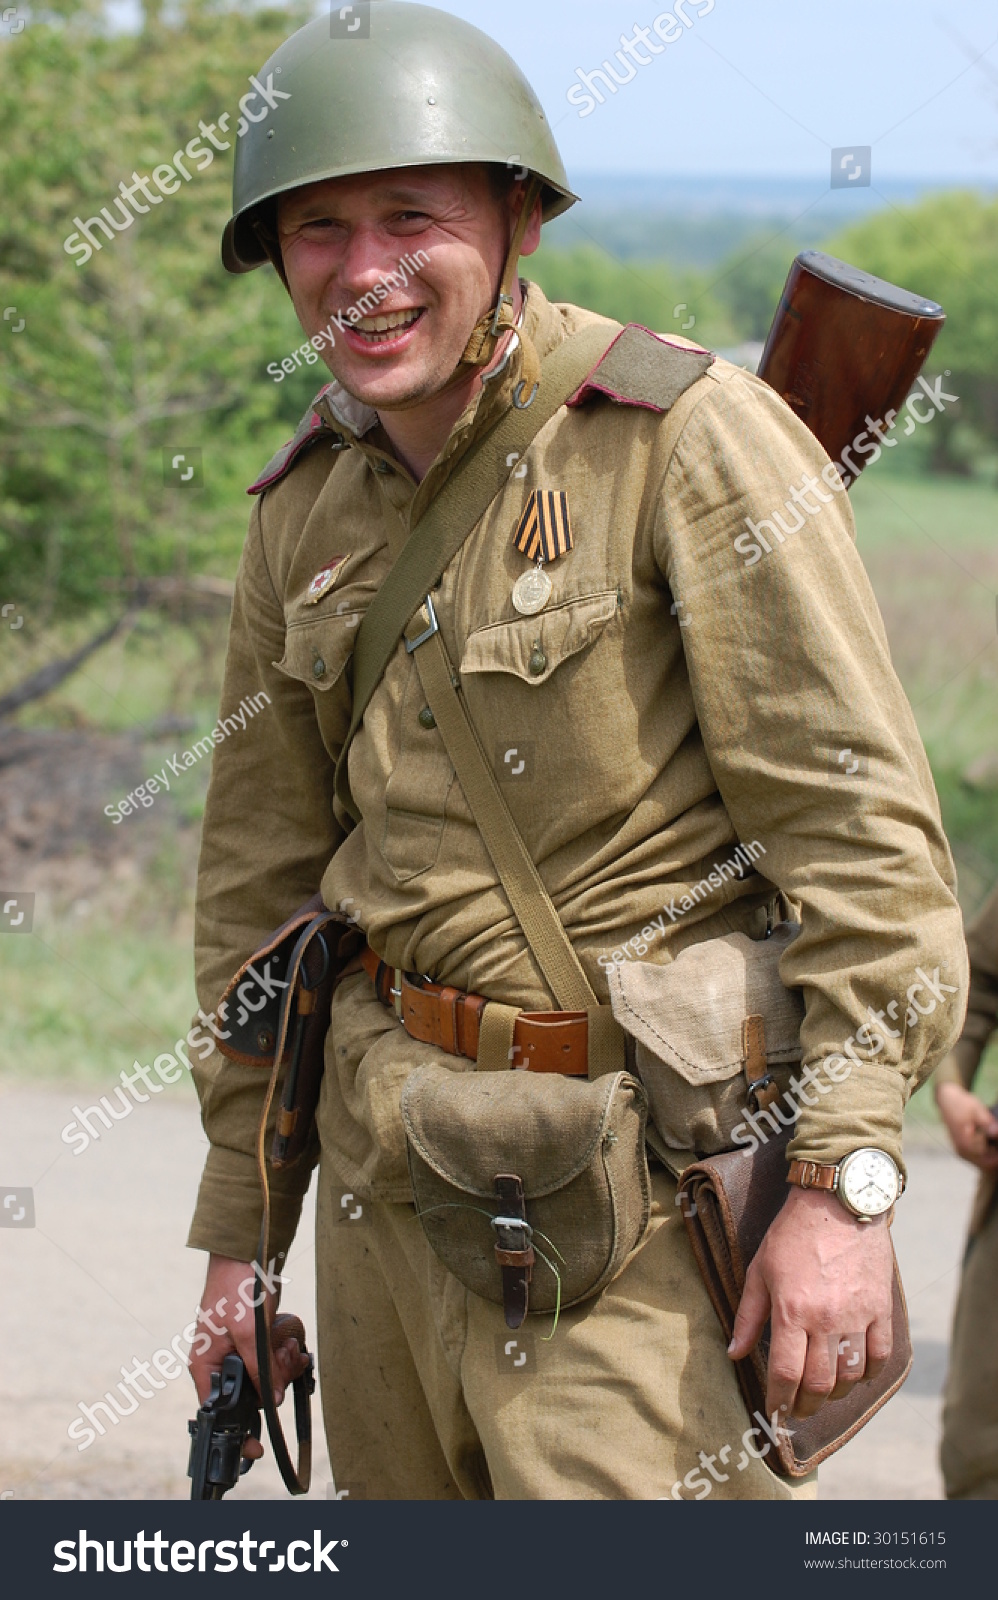 Member Of History Club Wear Historical Soviet Uniform As He Participate ...